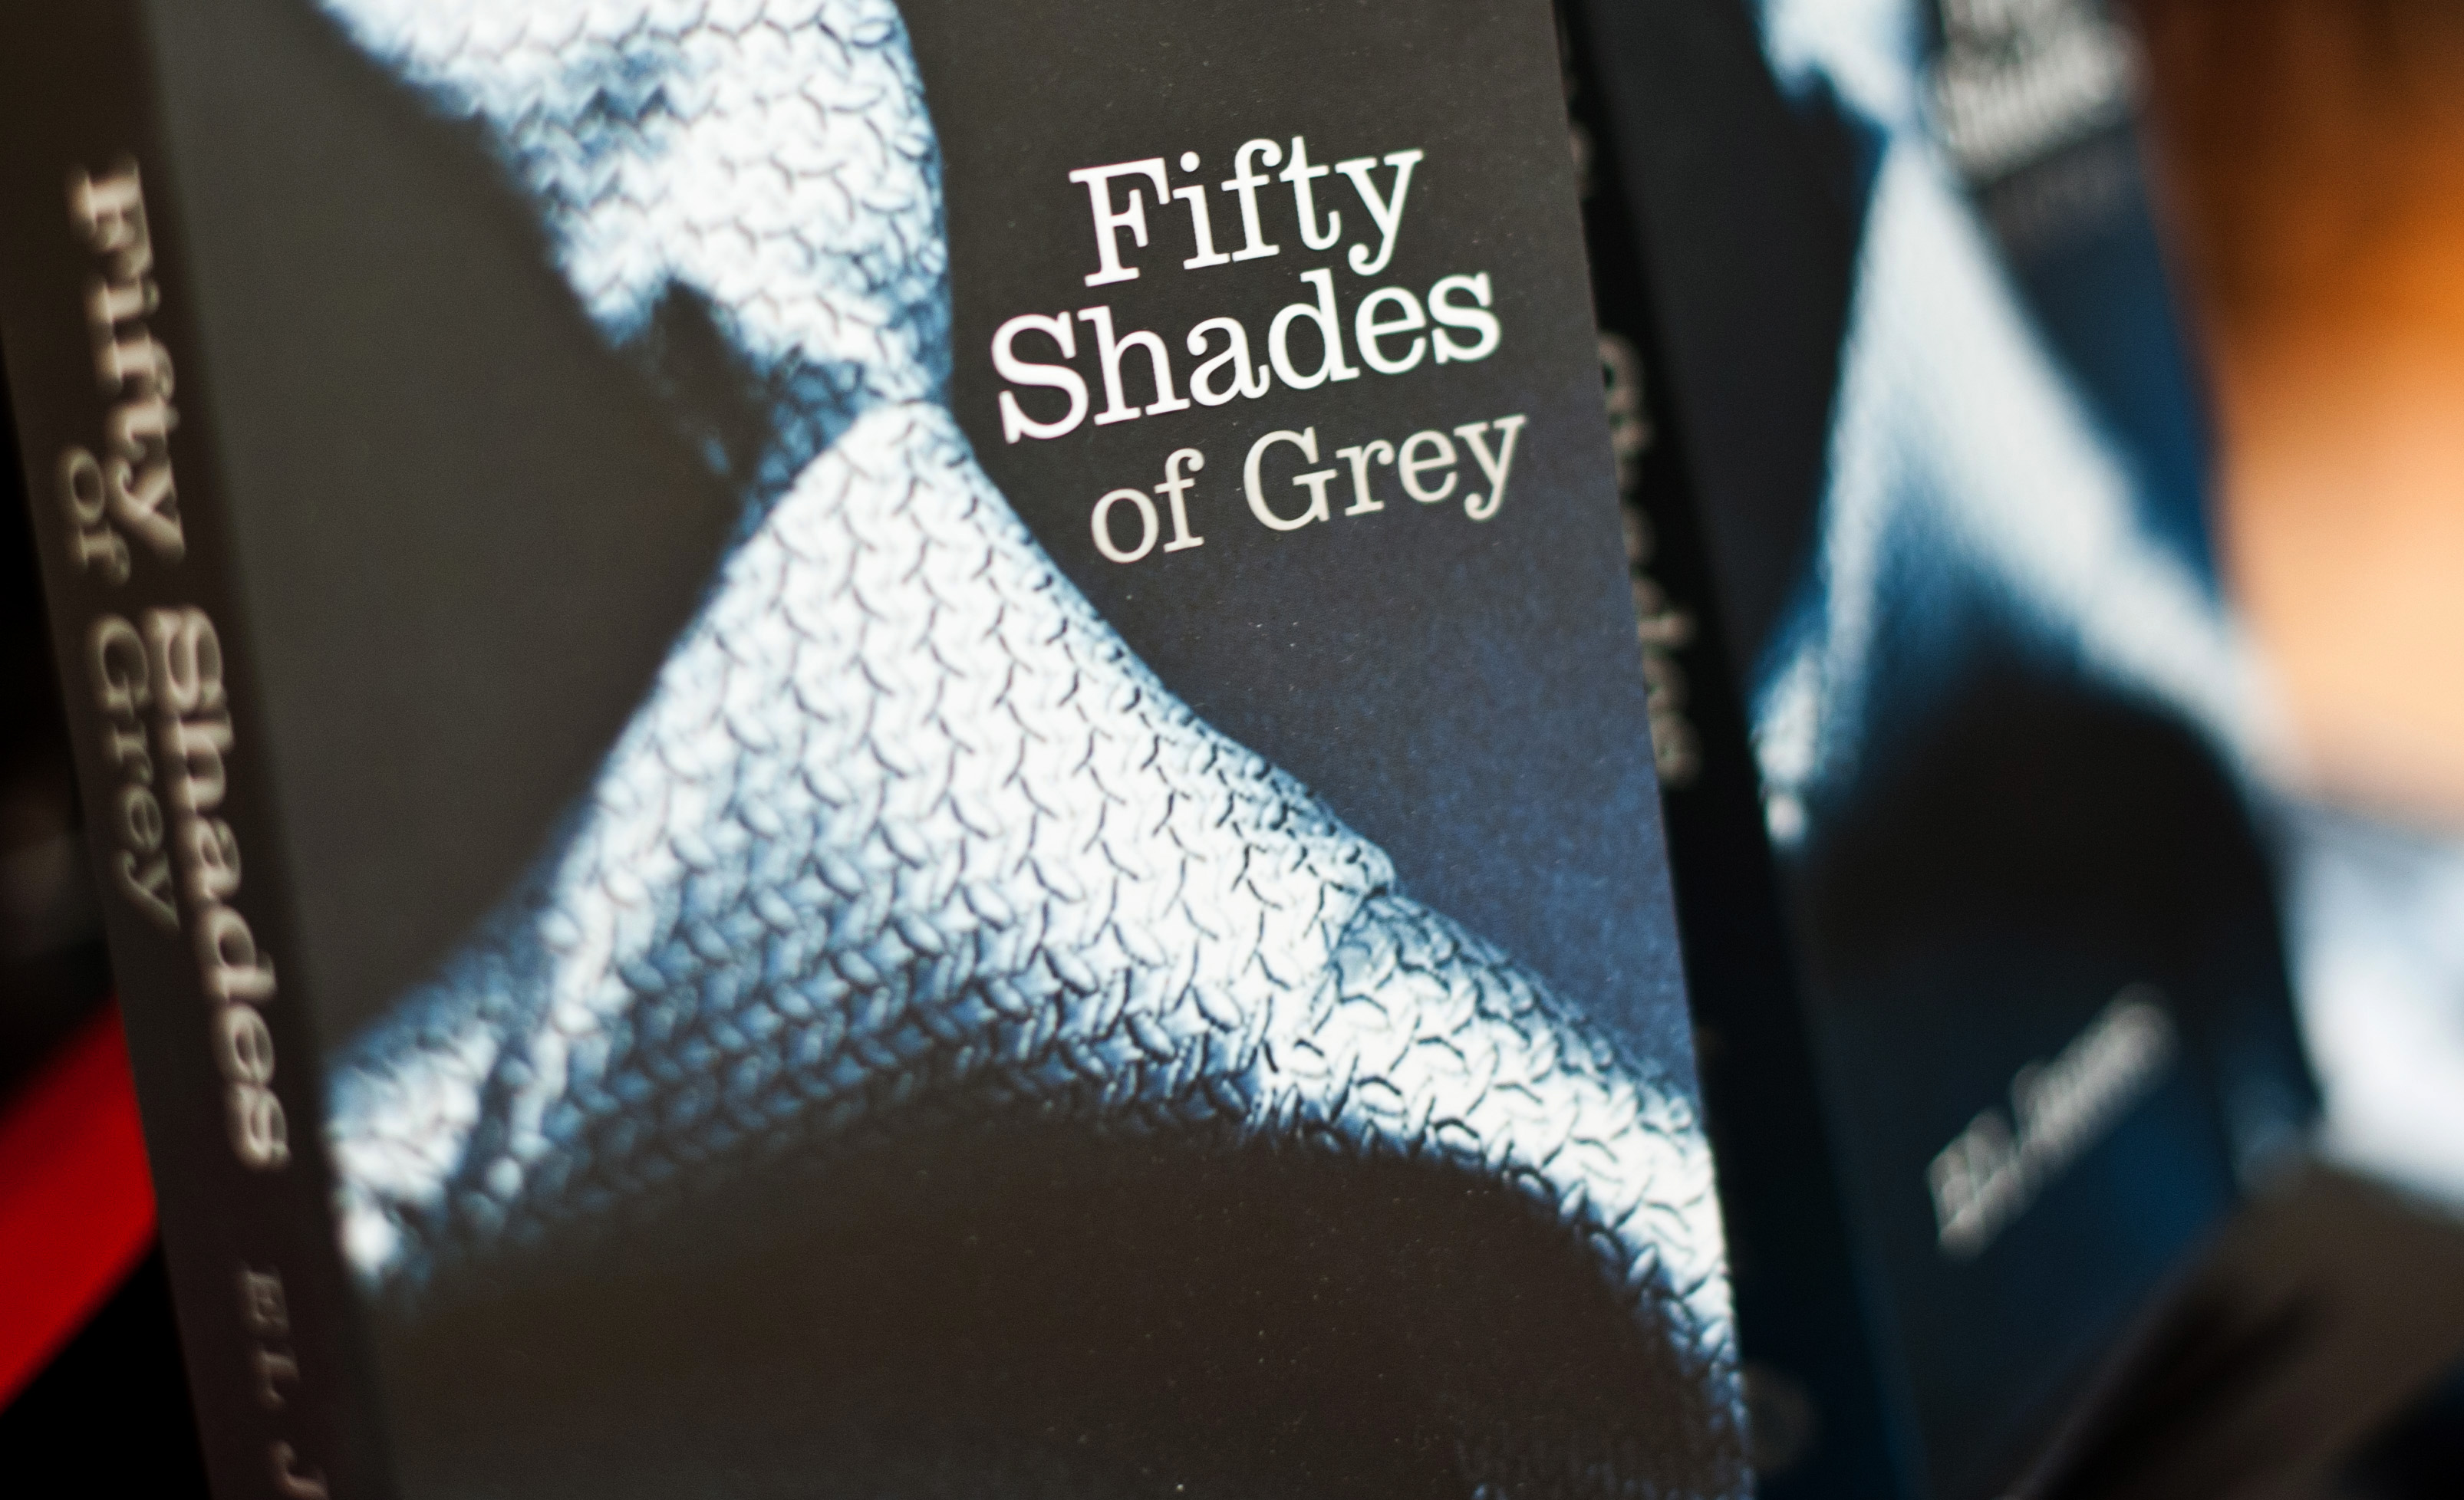 5 Things The Fifty Shades Of Grey Books Get Wrong About sm